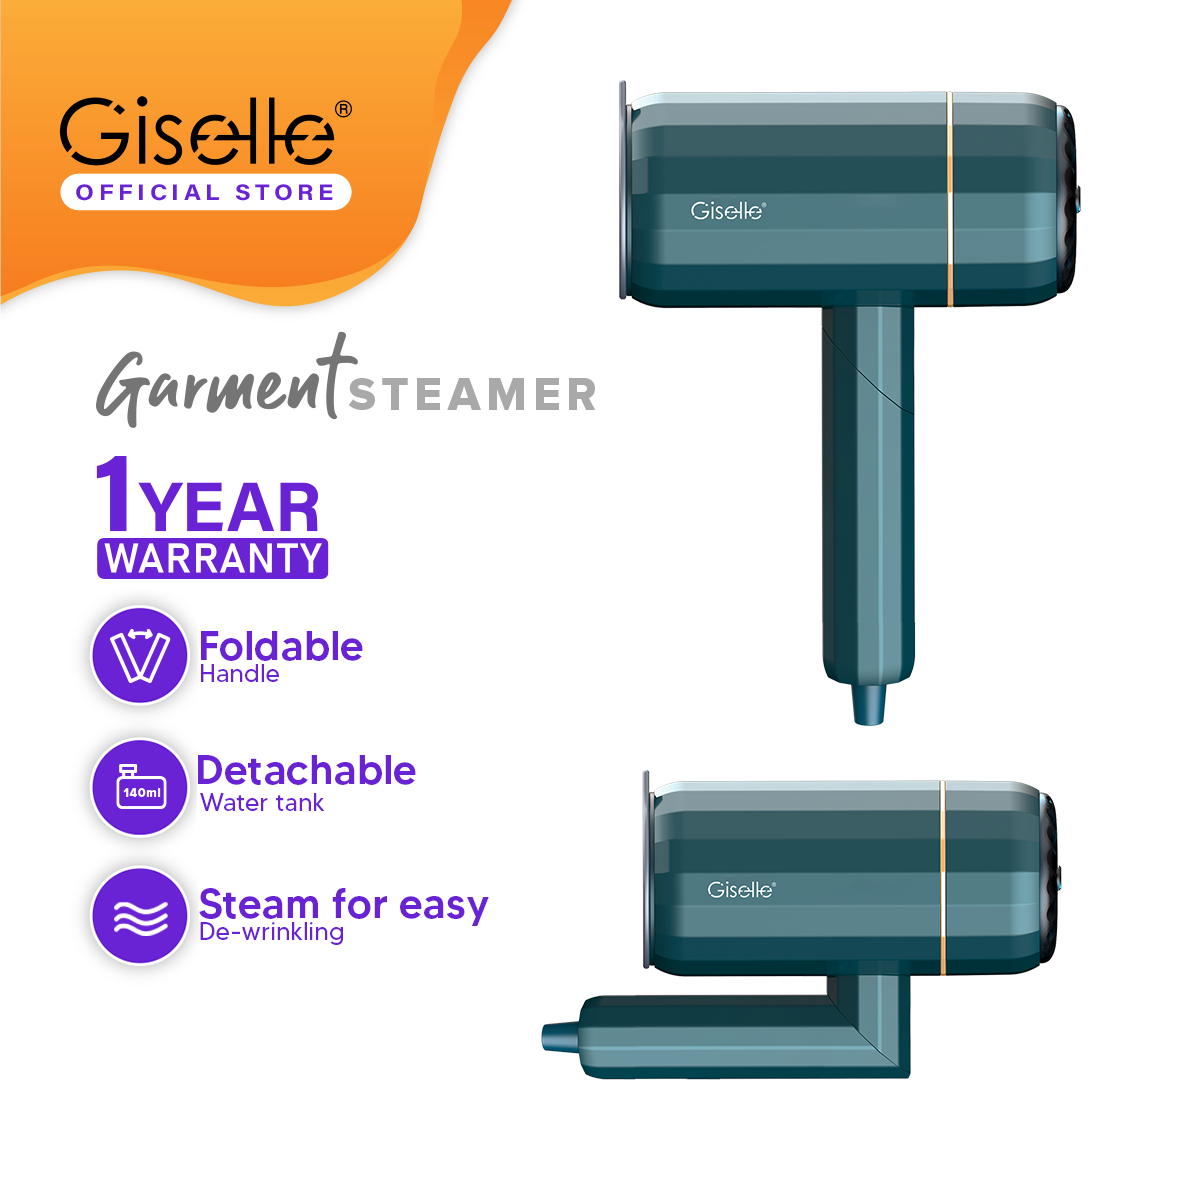 Giselle Foldable Handheld Garment Steamer Iron Portable Travel Size Ready to use in 30s (140ml/1200W) - KEA0400GN